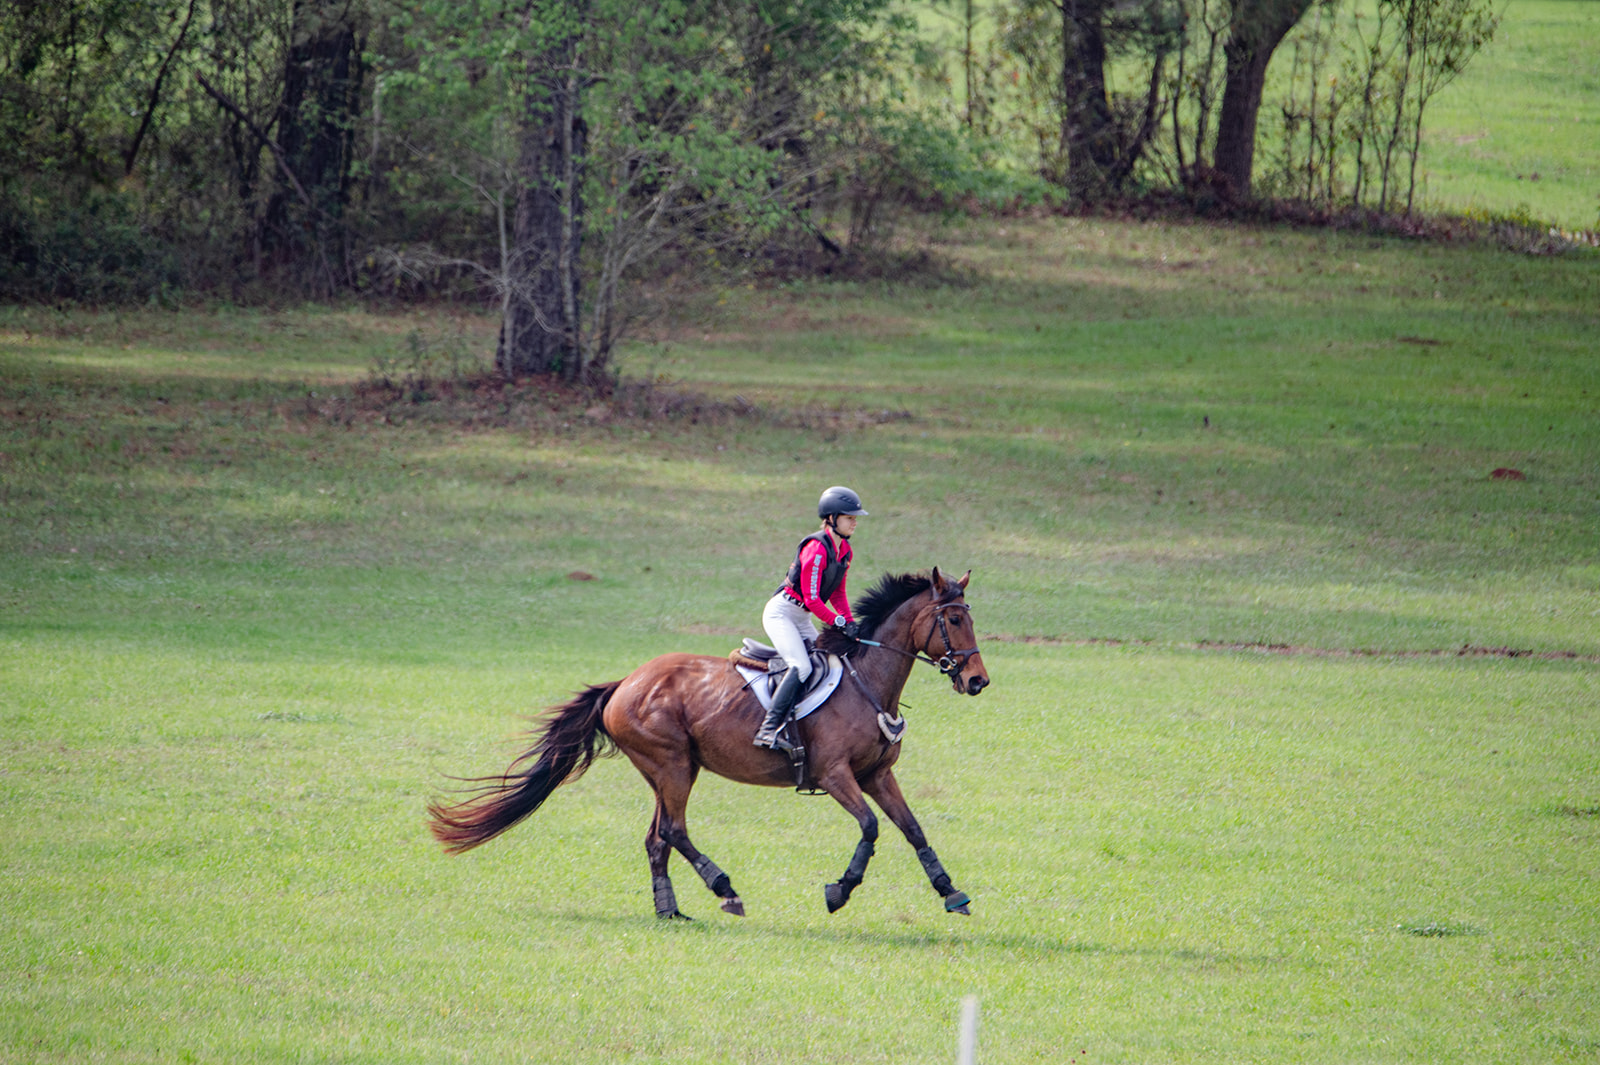 Equestrian completing the Cross Country course at an Eventing show at Mahan Farm in Tallahassee, FL calicoandchrome.com